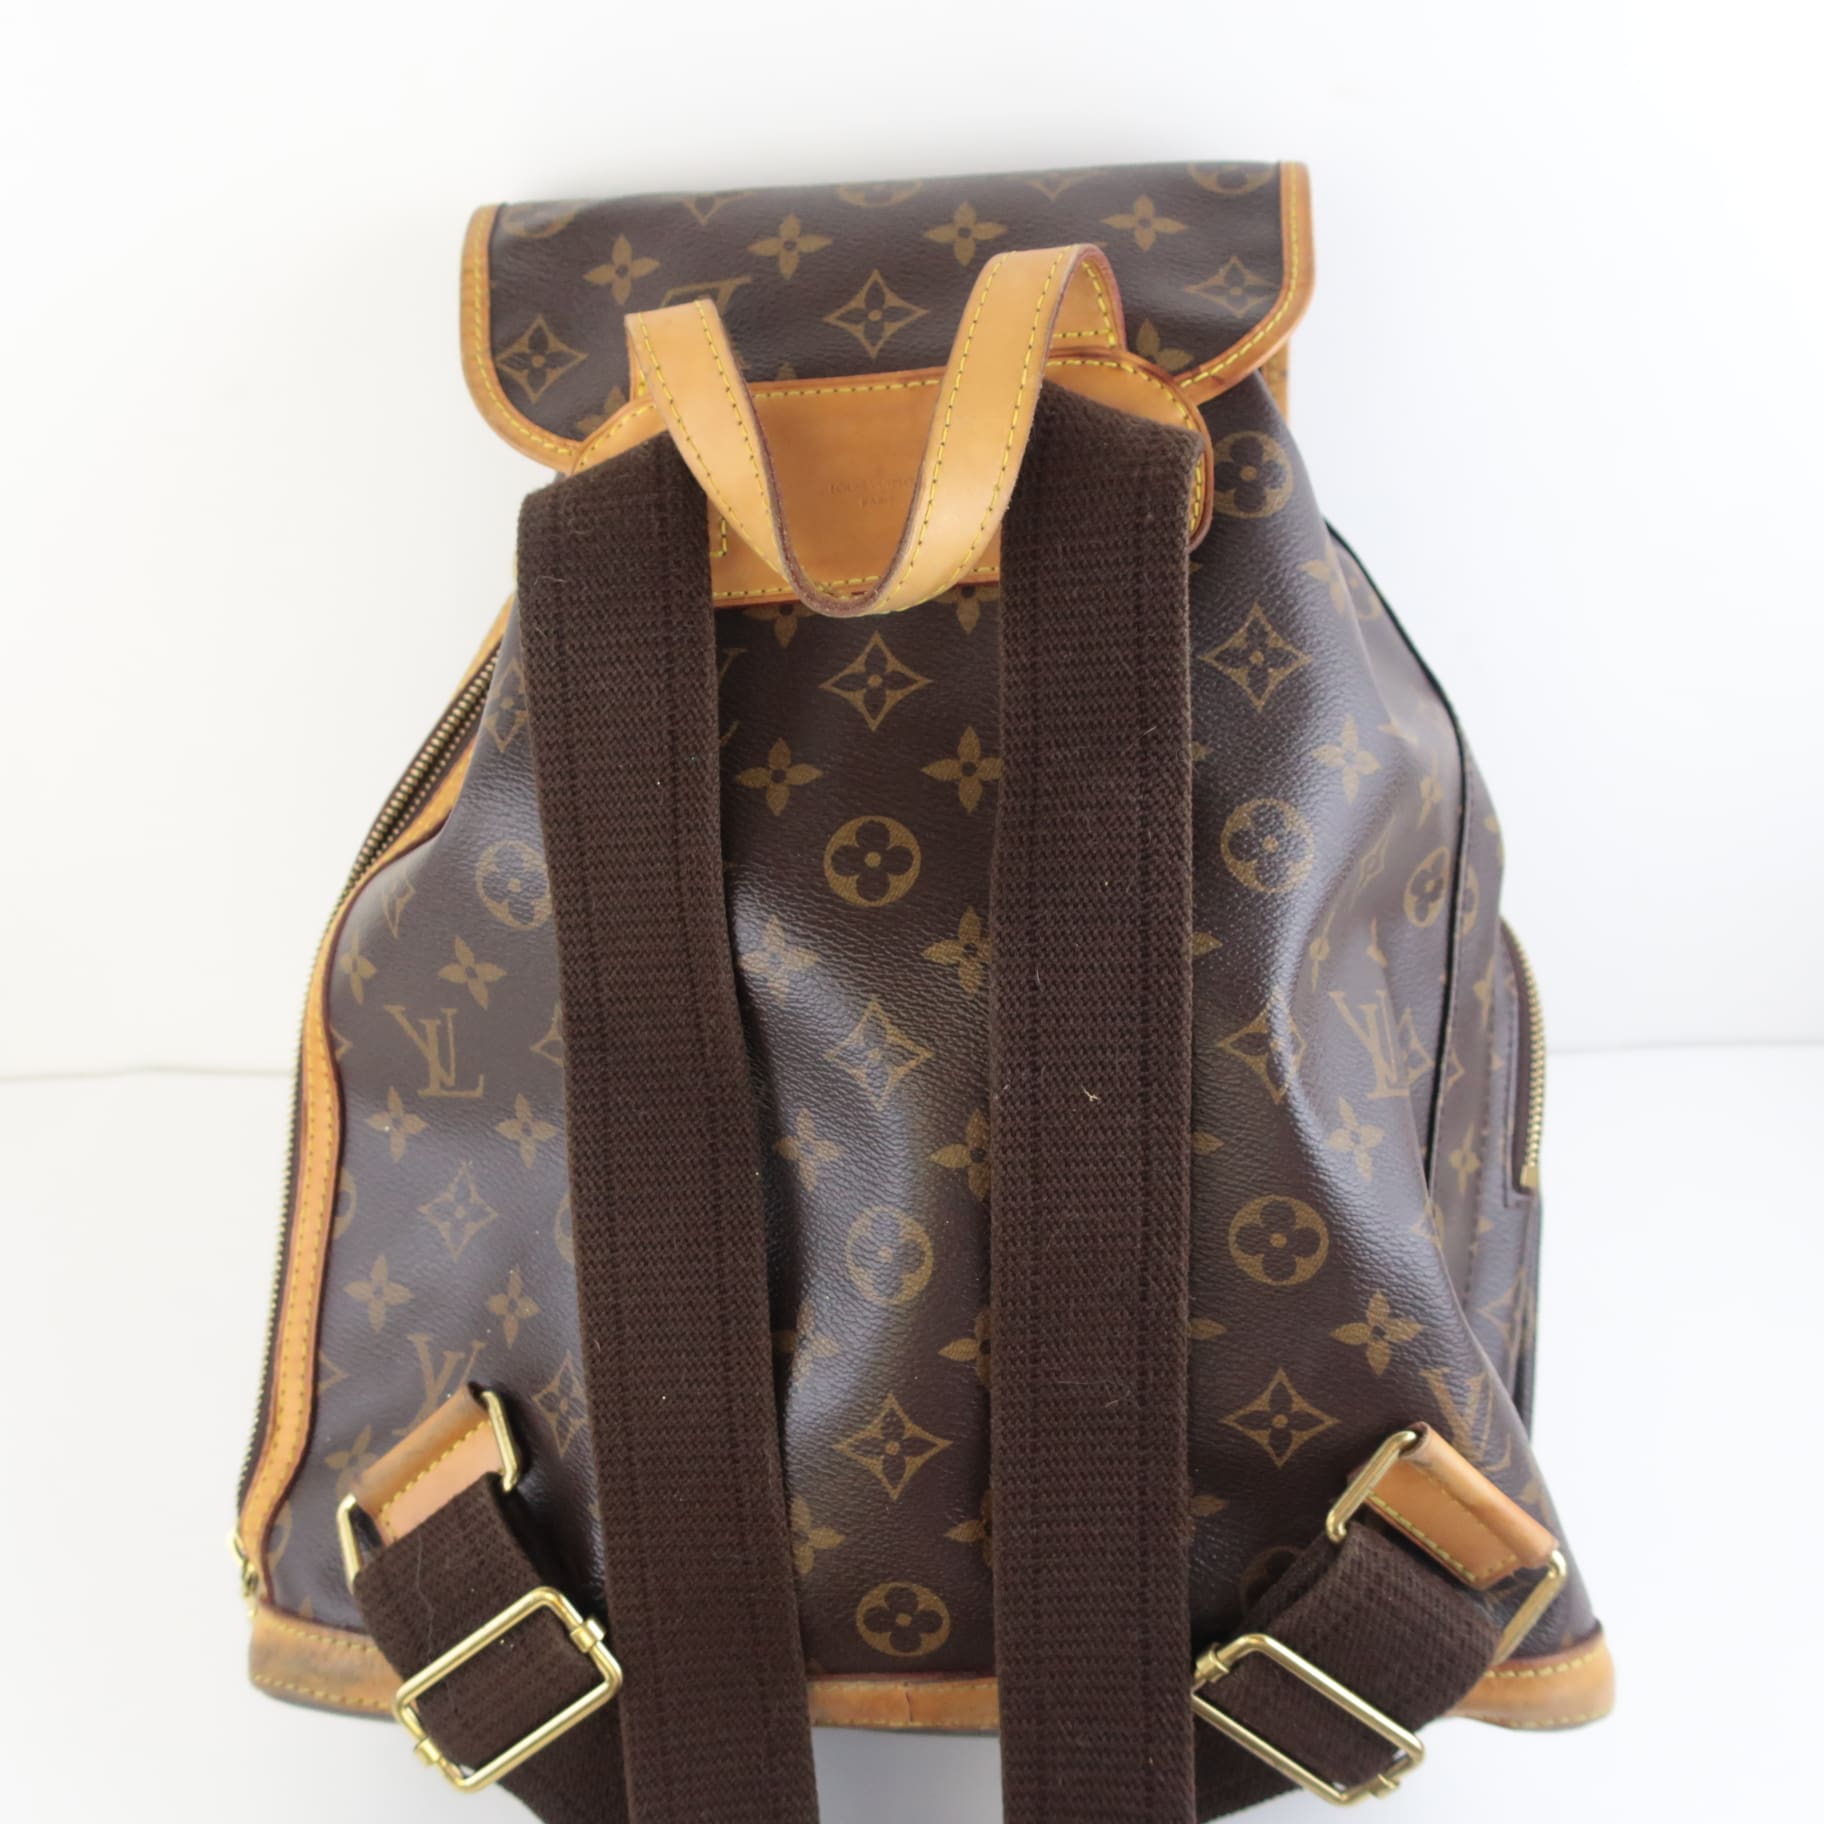 What Is Your Diaper Bag? Best Louis Vuitton Handbags To Use As Diaper –  Bagaholic